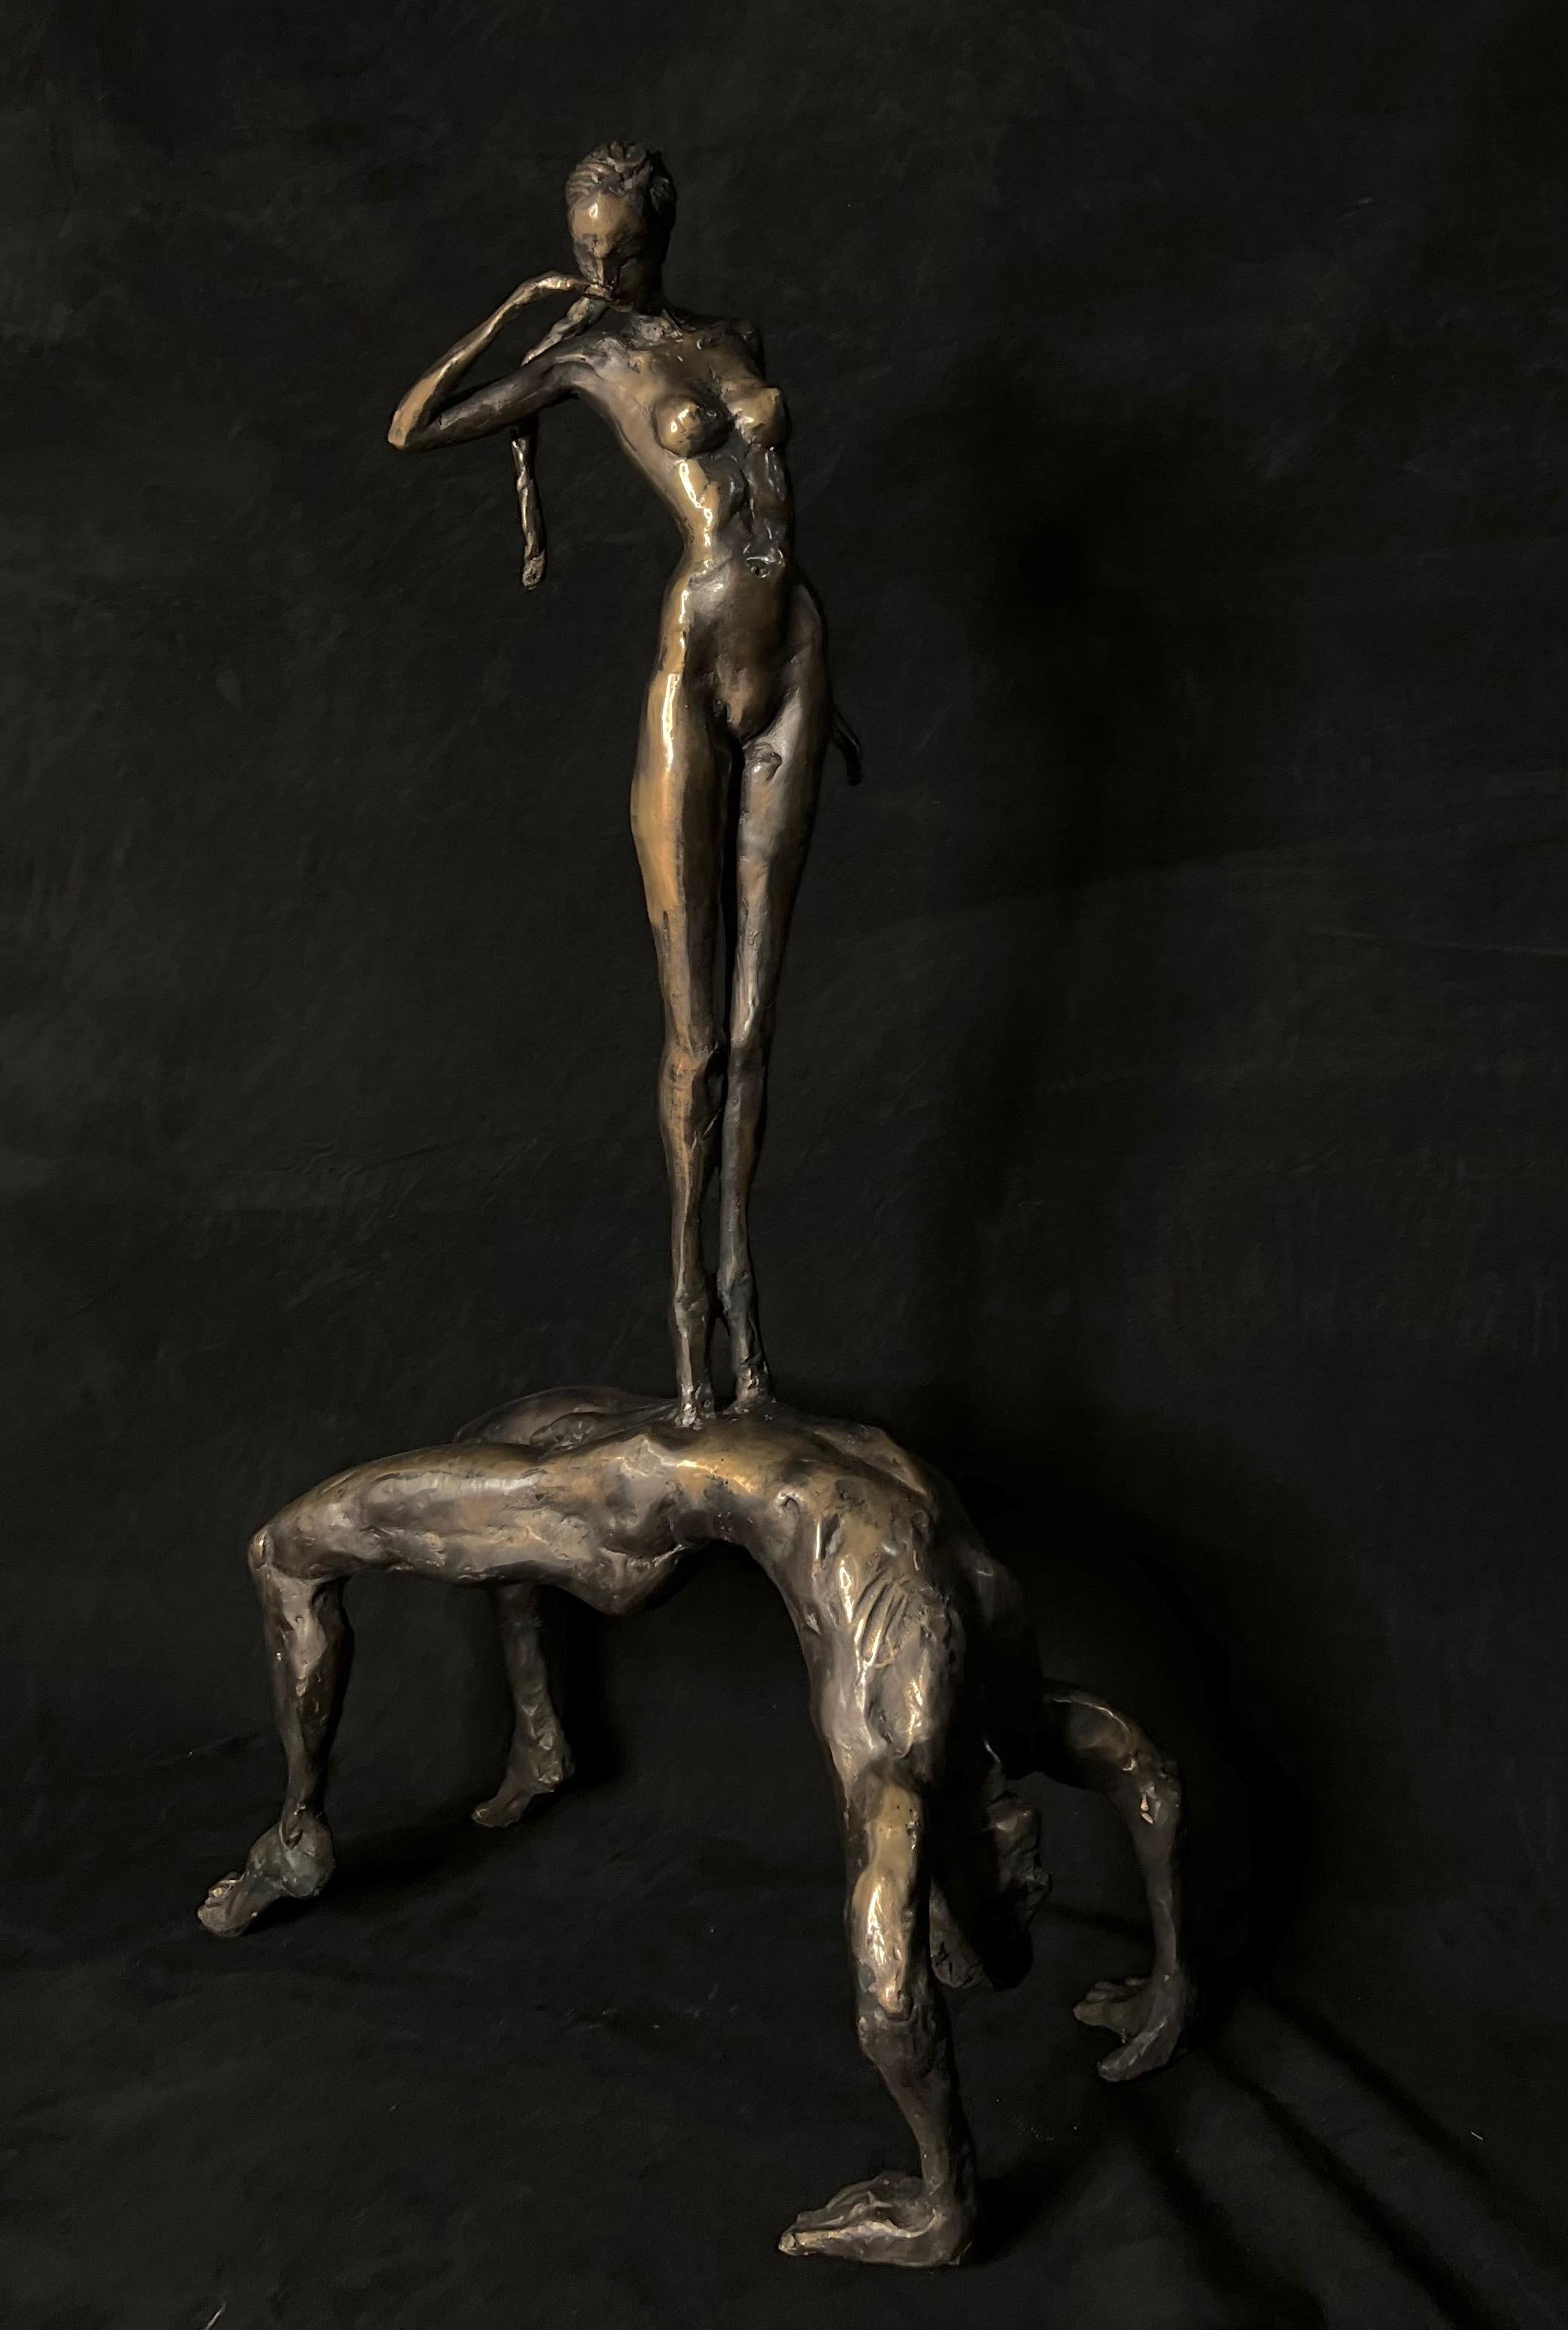 Oh my ! Bronze figurative sculpture - Sculpture by tauno Kangro